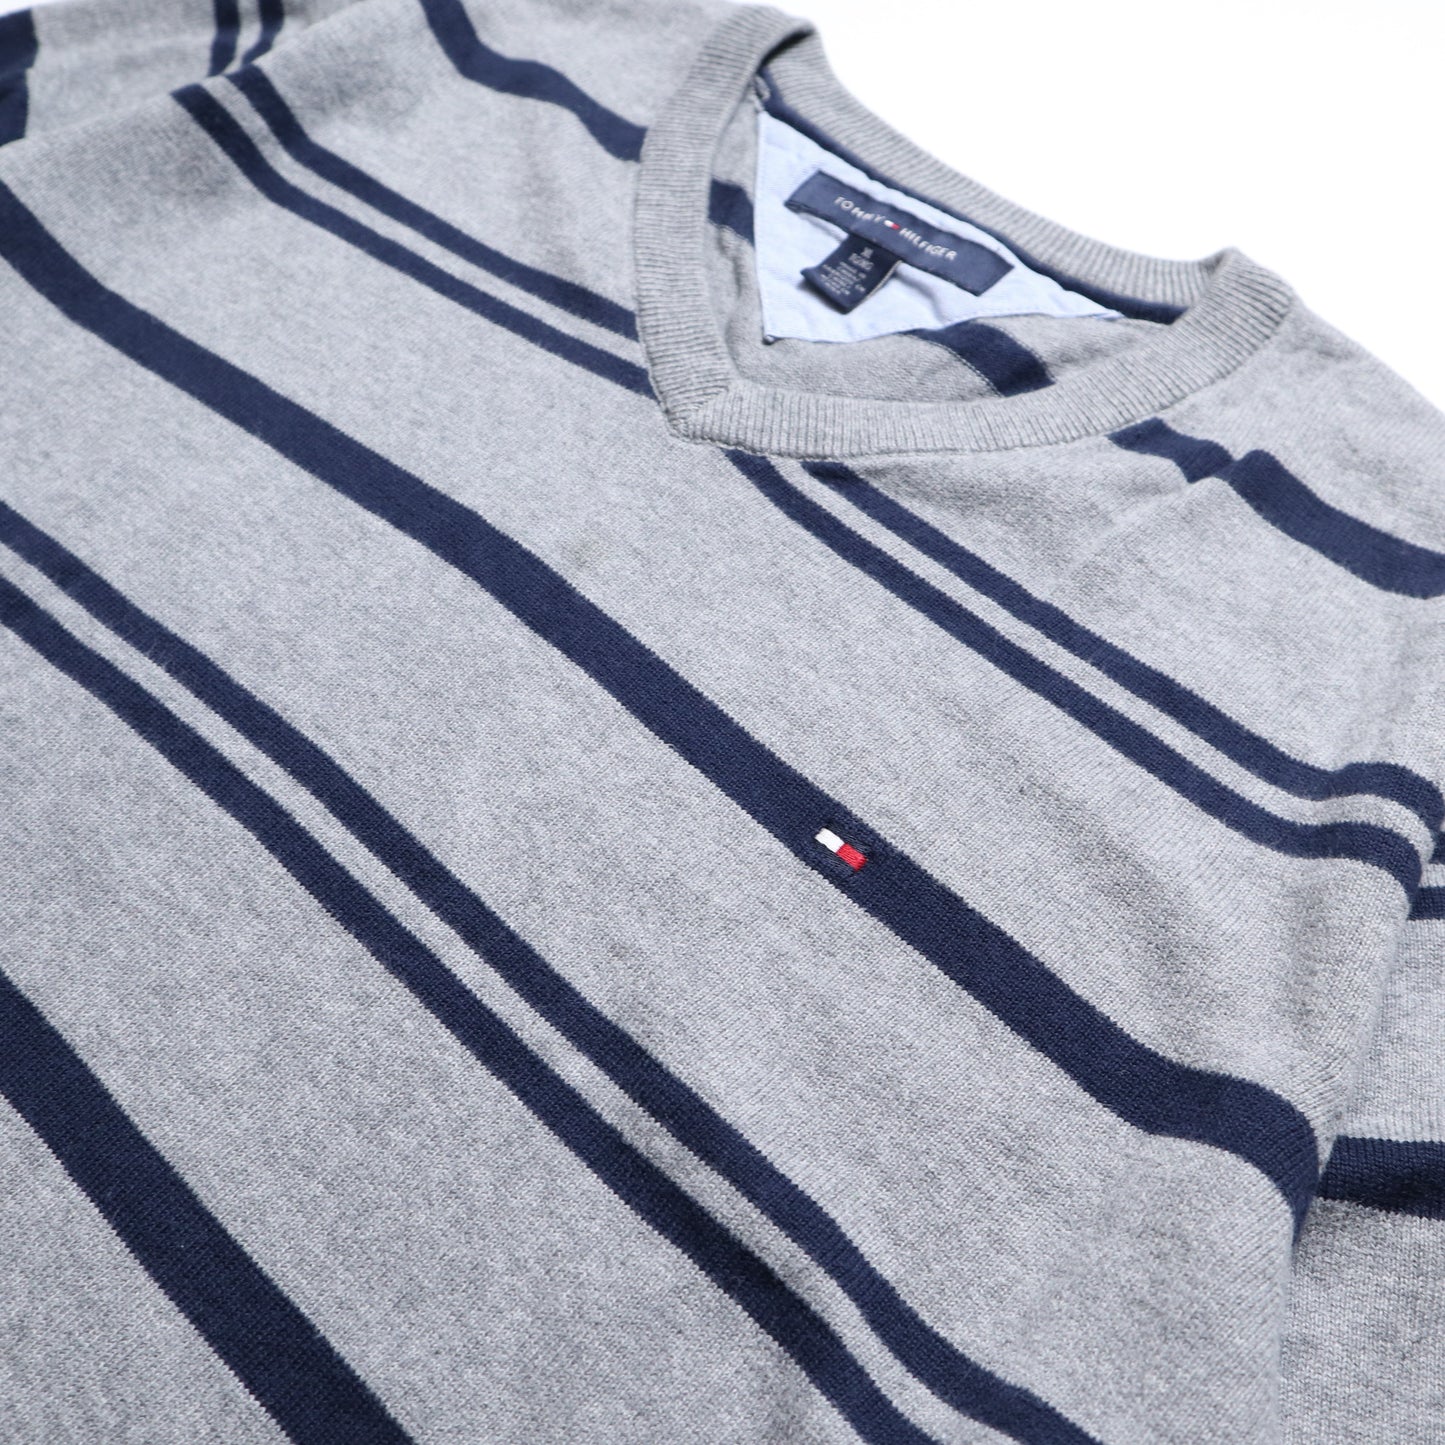 Tommy Hilfiger Gray Striped Sweater